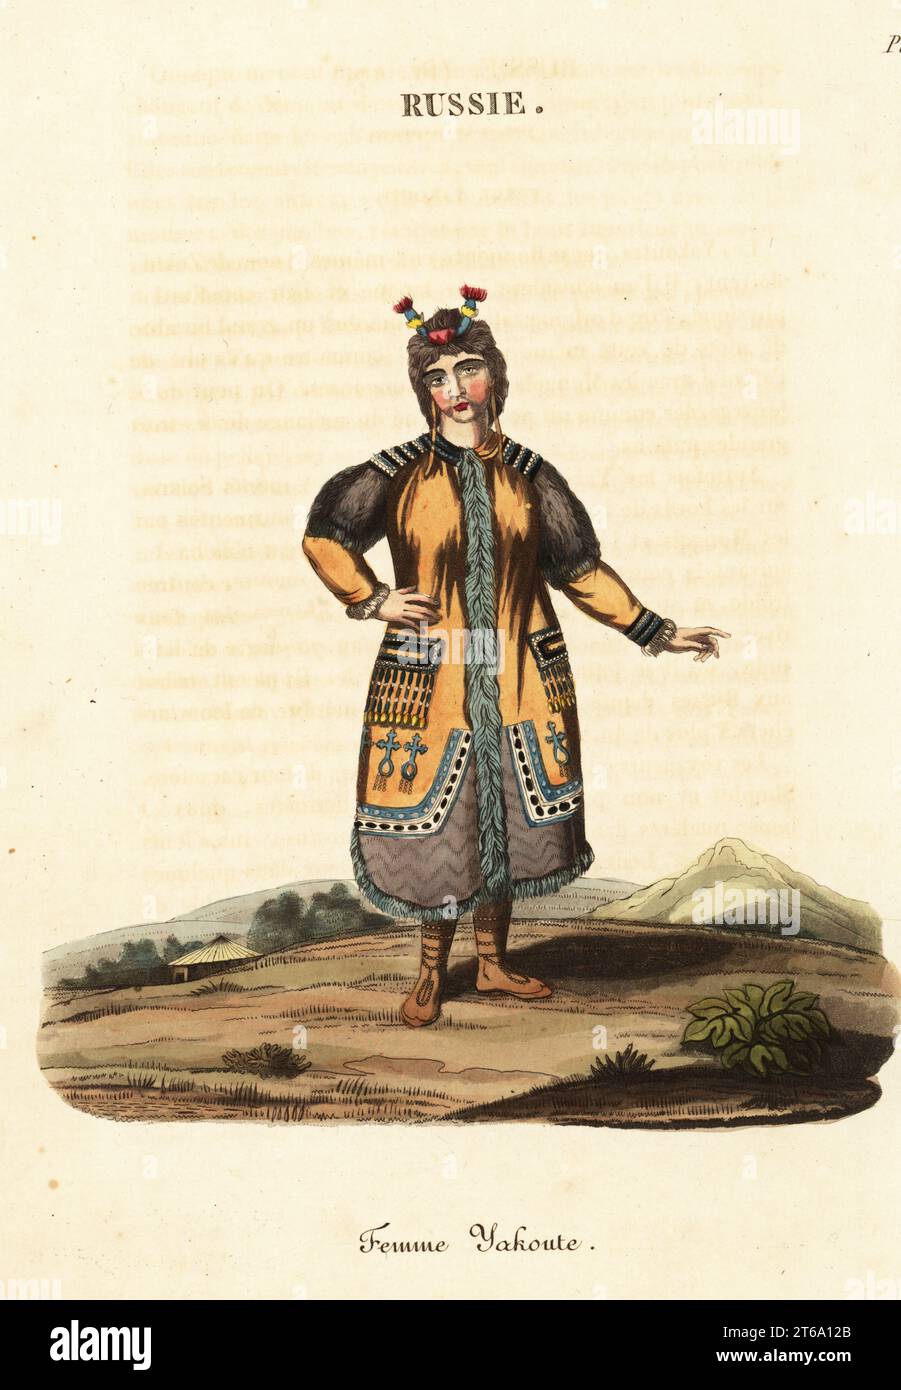 Married woman of the Yakut or Sakha people, 18th century. She wears a curious hair ornament, long earrings, and animal-skin vest decorated with beads and fringes. Female Yakouti, Femme Yakoute. Handcoloured copperplate engraving after an illustration by William Alexander from J-B. Eyries La Russie: Costumes, Moeurs et Usages des Russes, Russia: Costumes, Manners and Mores of the Russians, Librairie de Gide Fils, Paris, 1823. Jean-Baptiste Eyries (1767-1846) was a French geographer, author and translator. Stock Photo